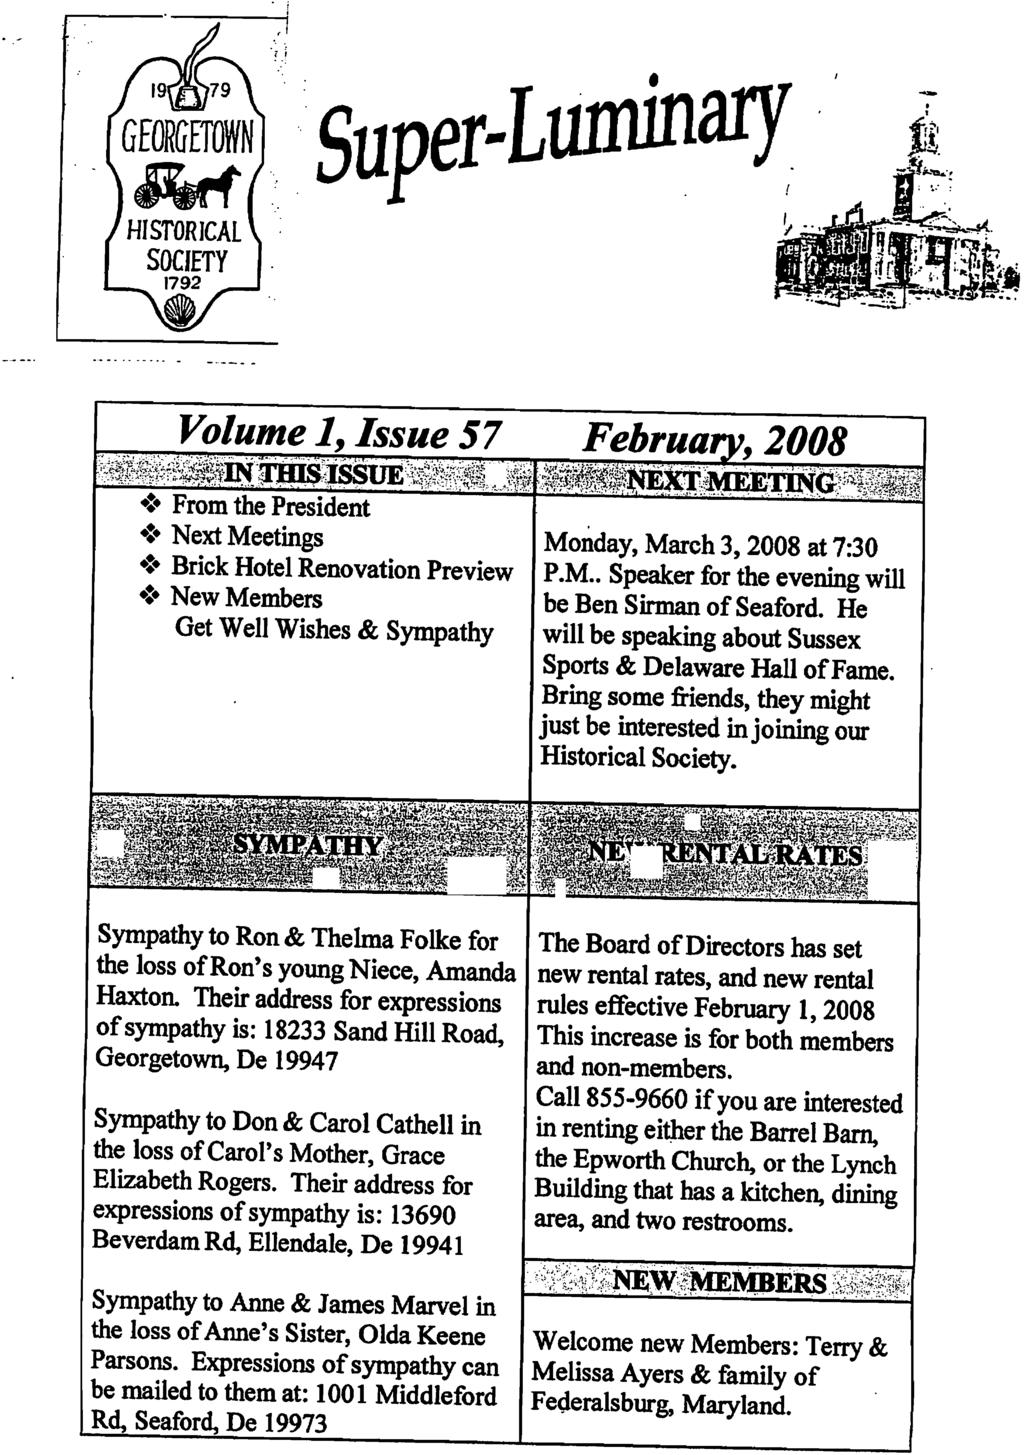 Super-Luminaiy HISTORICAL SOCIETY Volume 1, Issue 57 February, 2008 From the President Next Meetings Brick Hotel Renovation Preview New Members Get Well Wishes & Sympathy Monday, March 3,2008 at 7:30